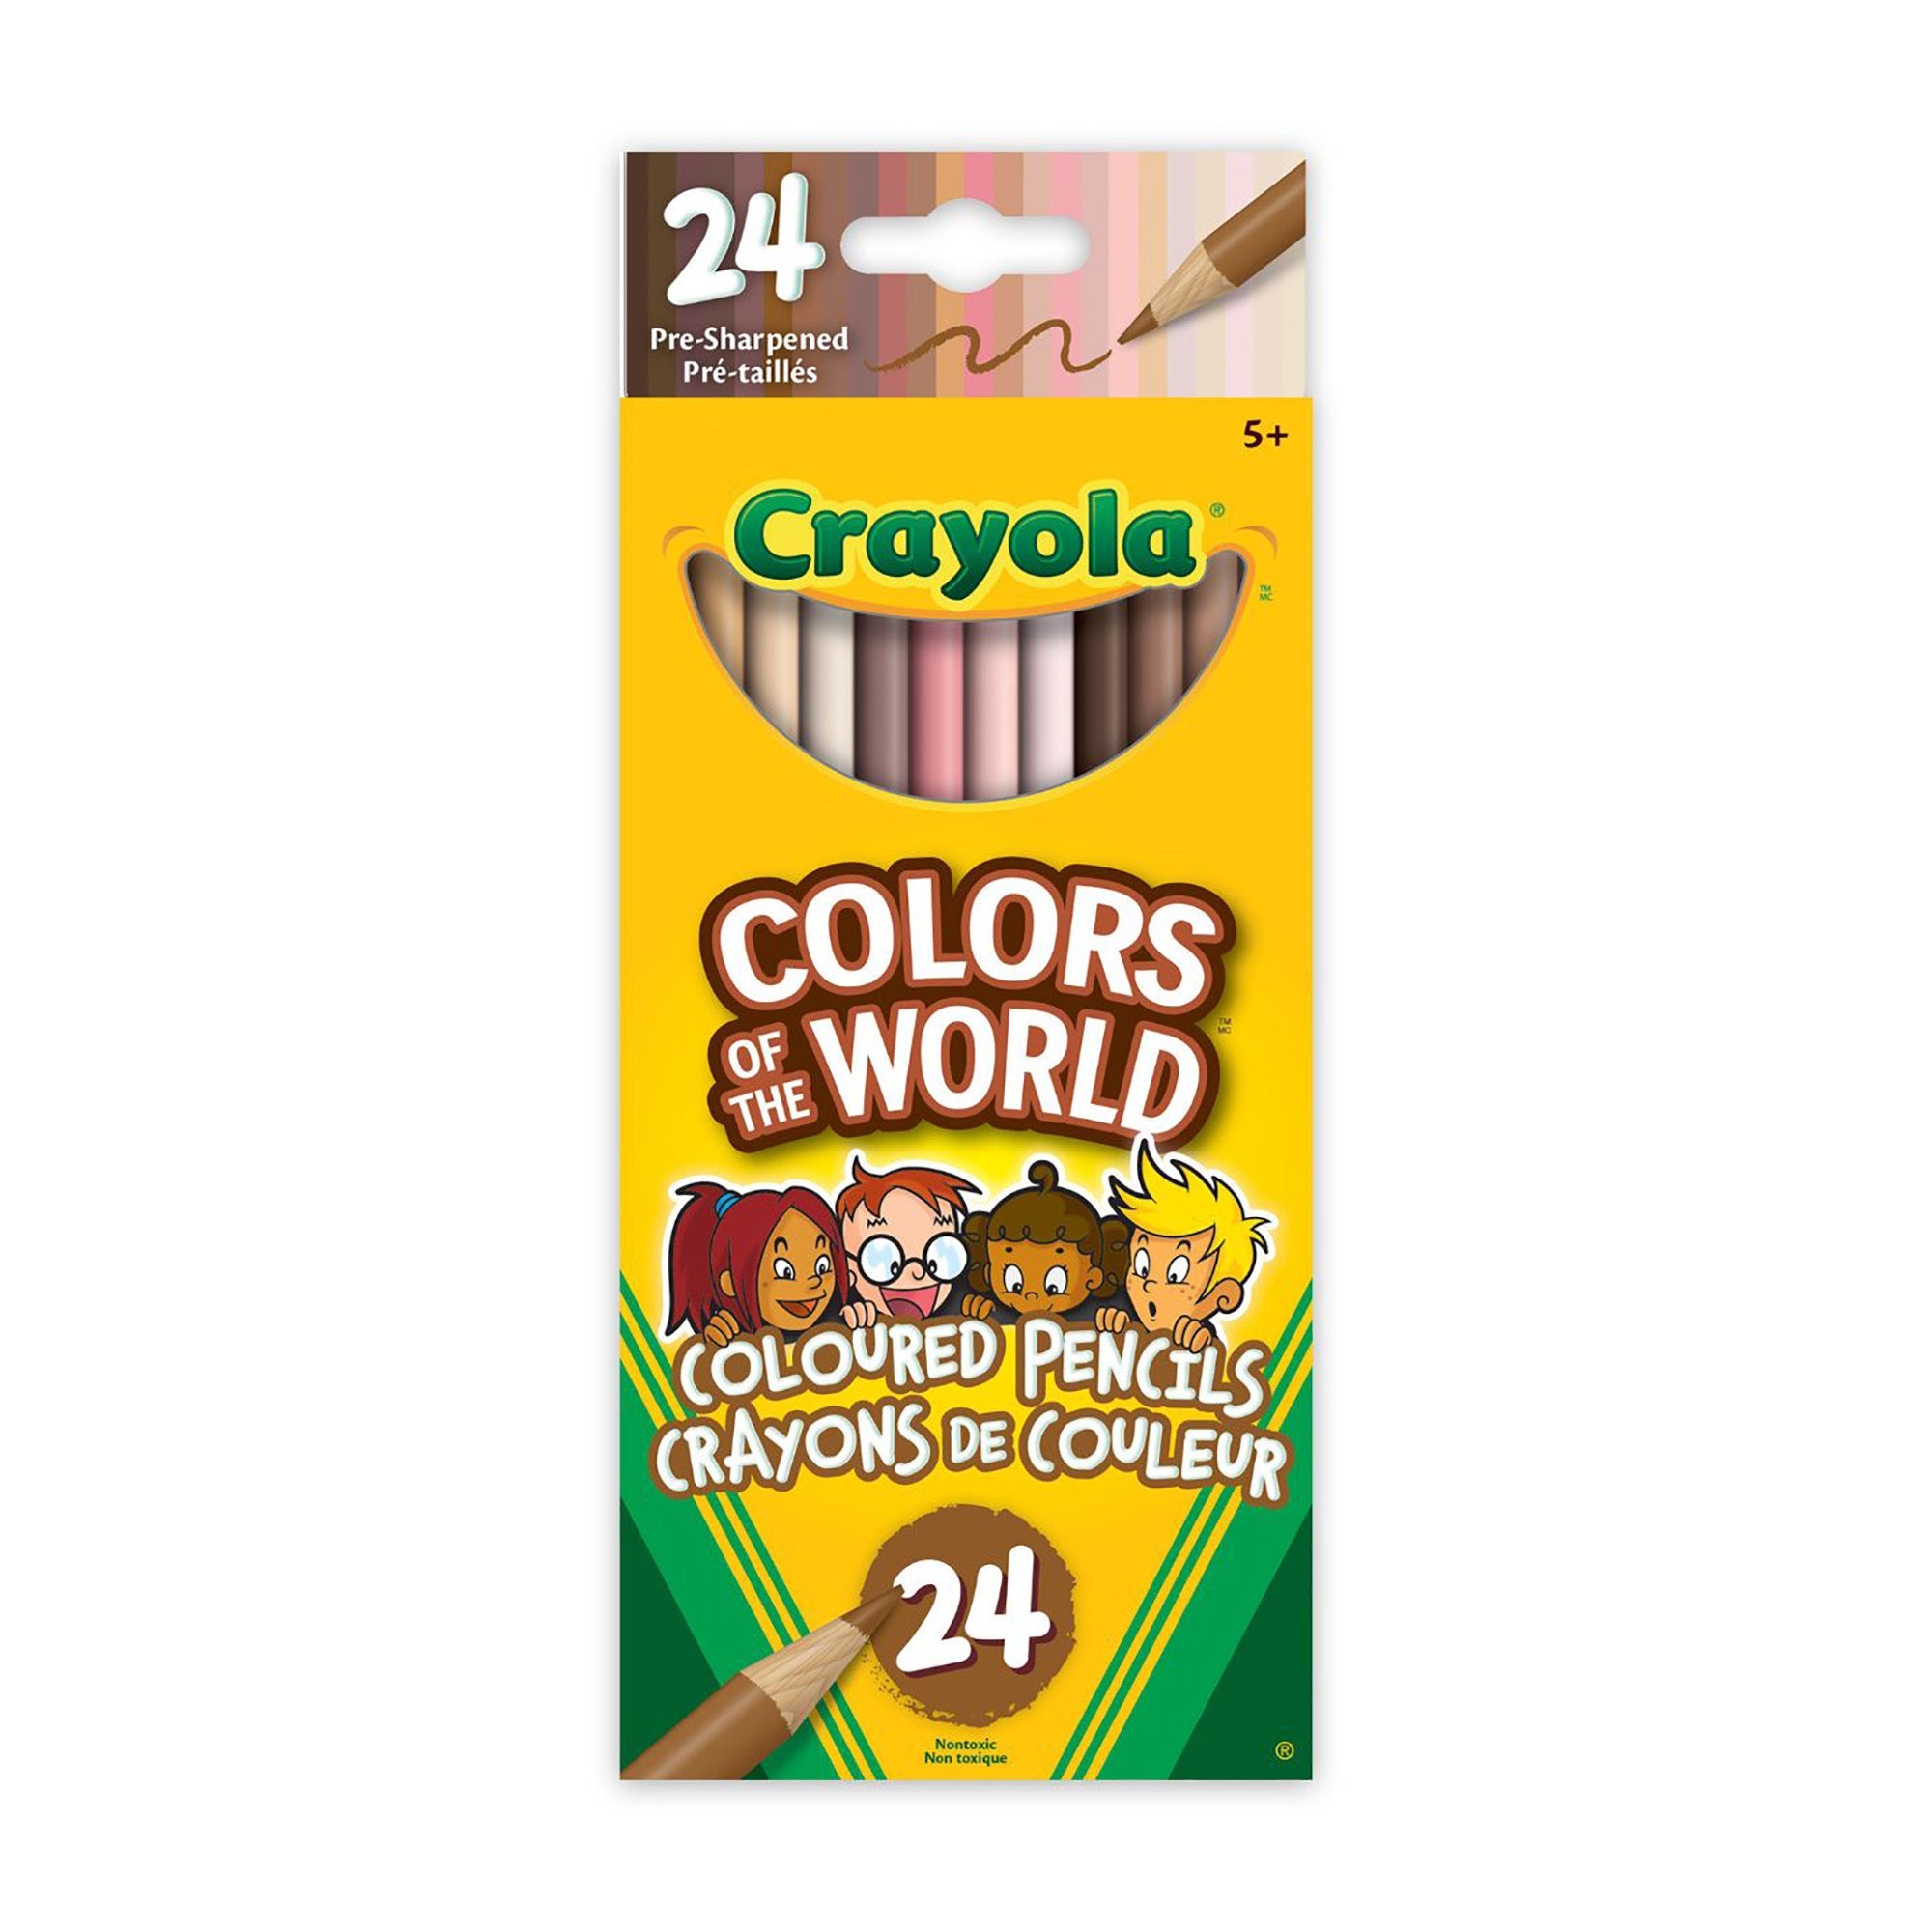 Crayola 24 Colored Pencils - Colors of the World 